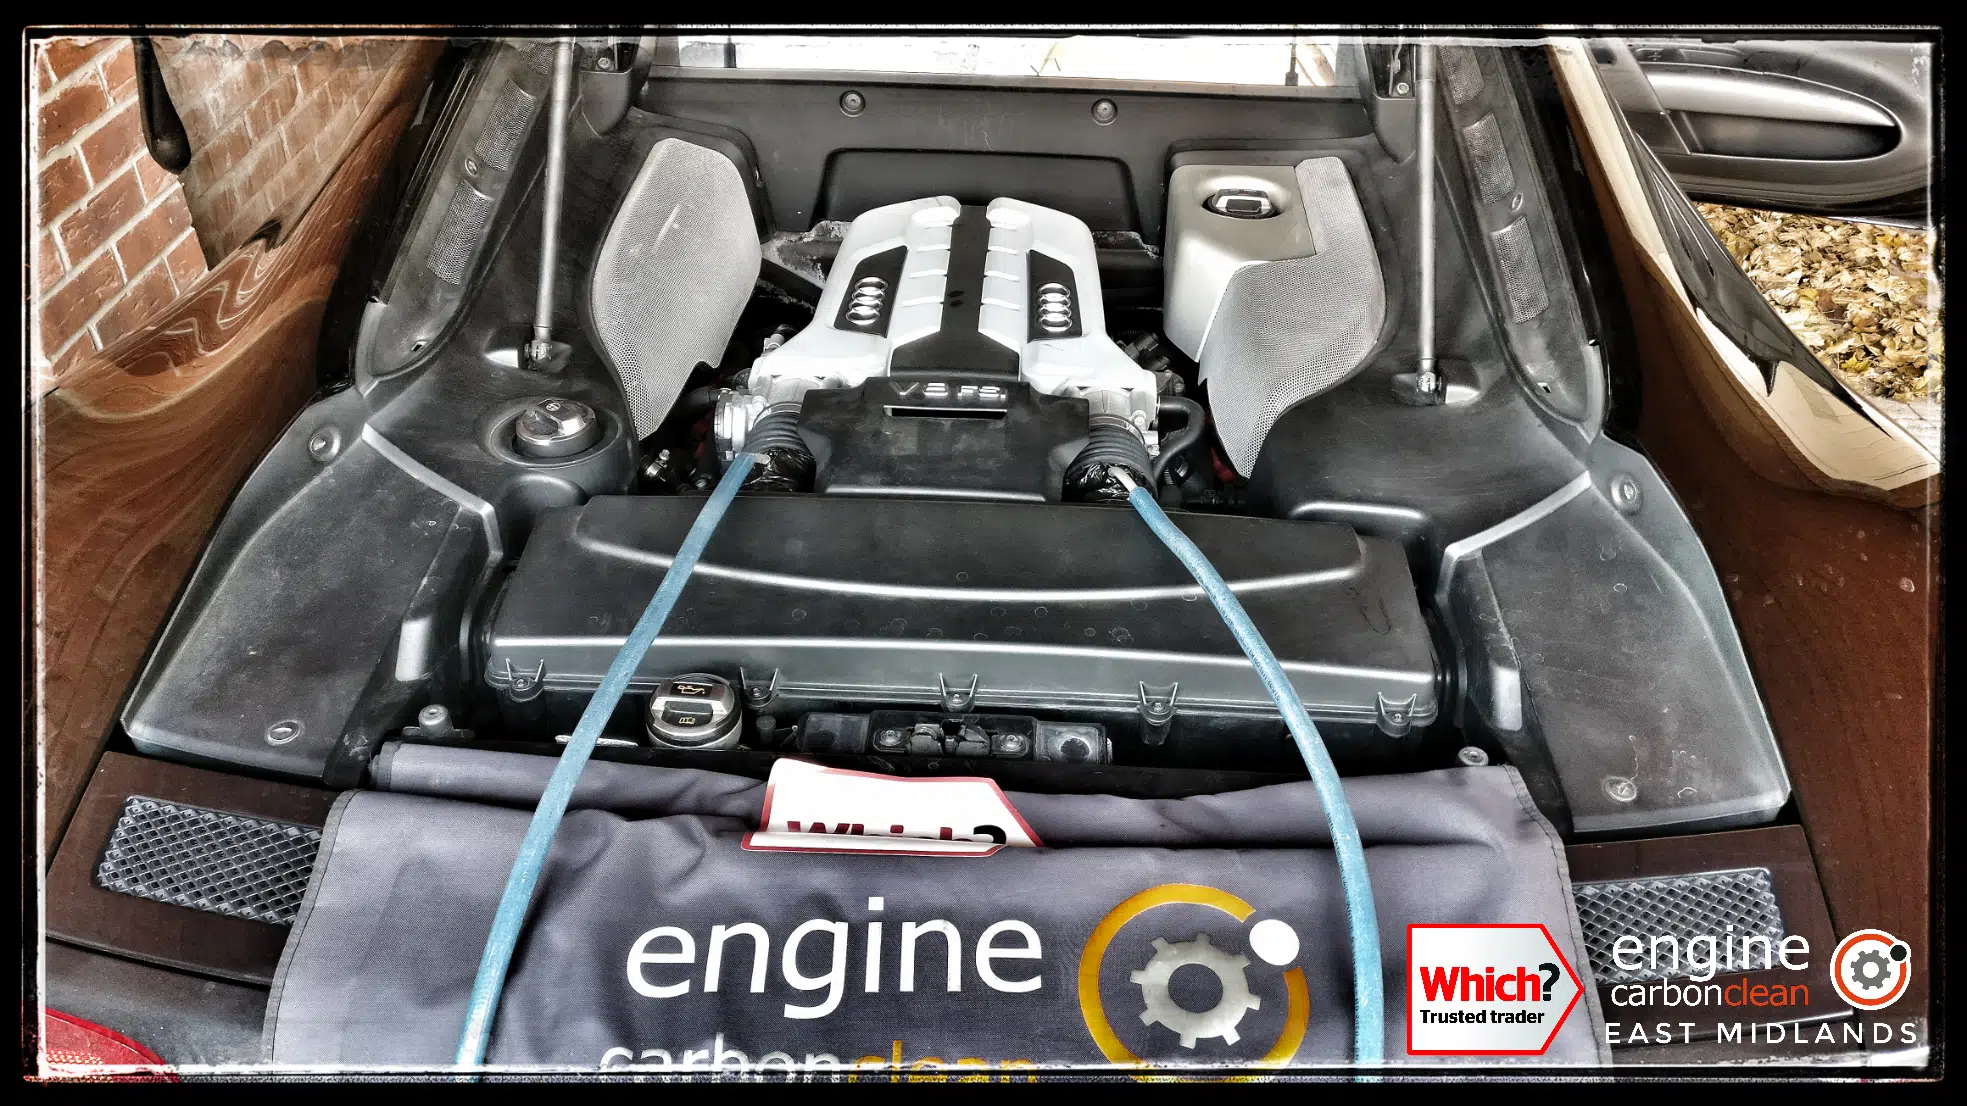 Engine Carbon Clean on an Audi R8 V8 (2008 - 96,555 miles)